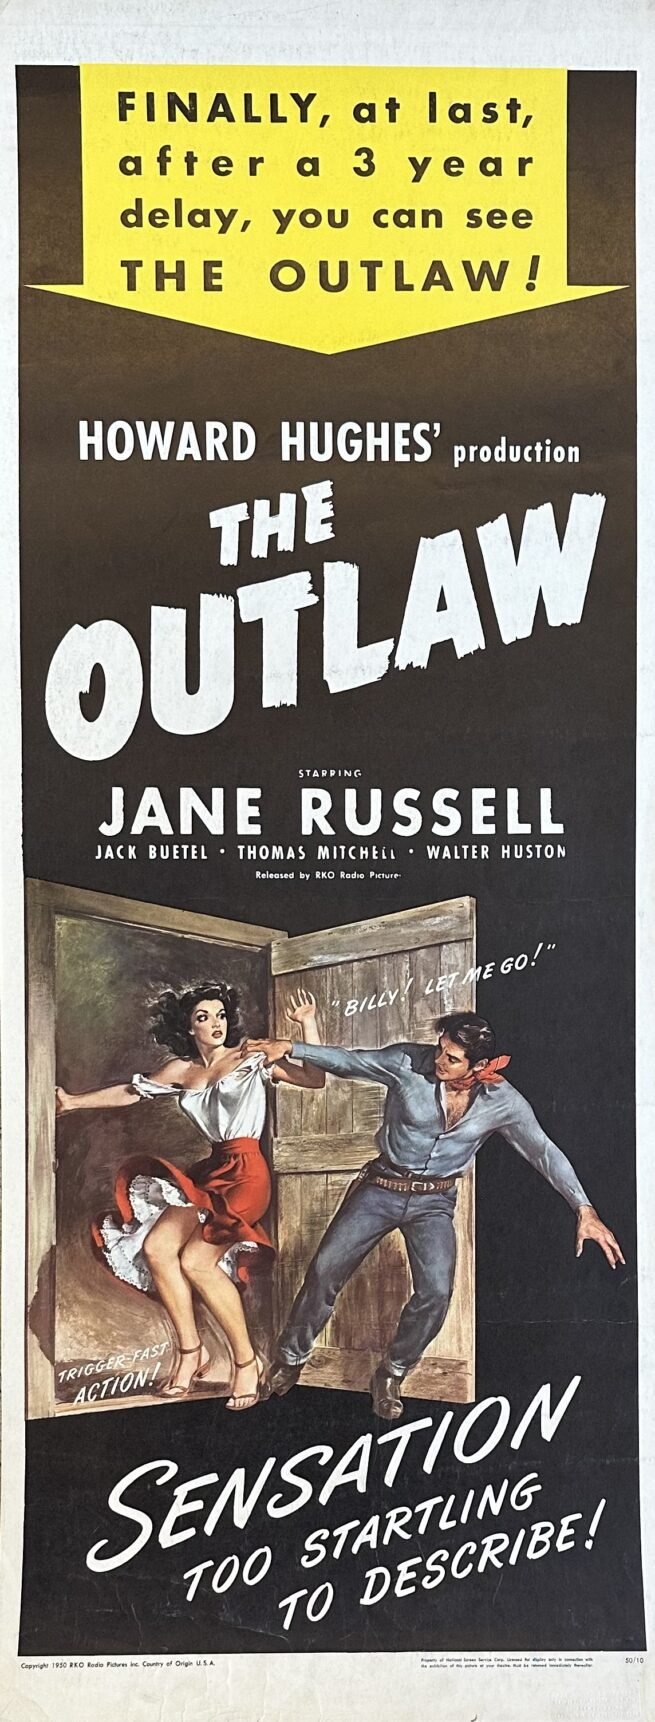 Original vintage cinema mocvie poster for the western, The Outlaw, starring Jane Russell